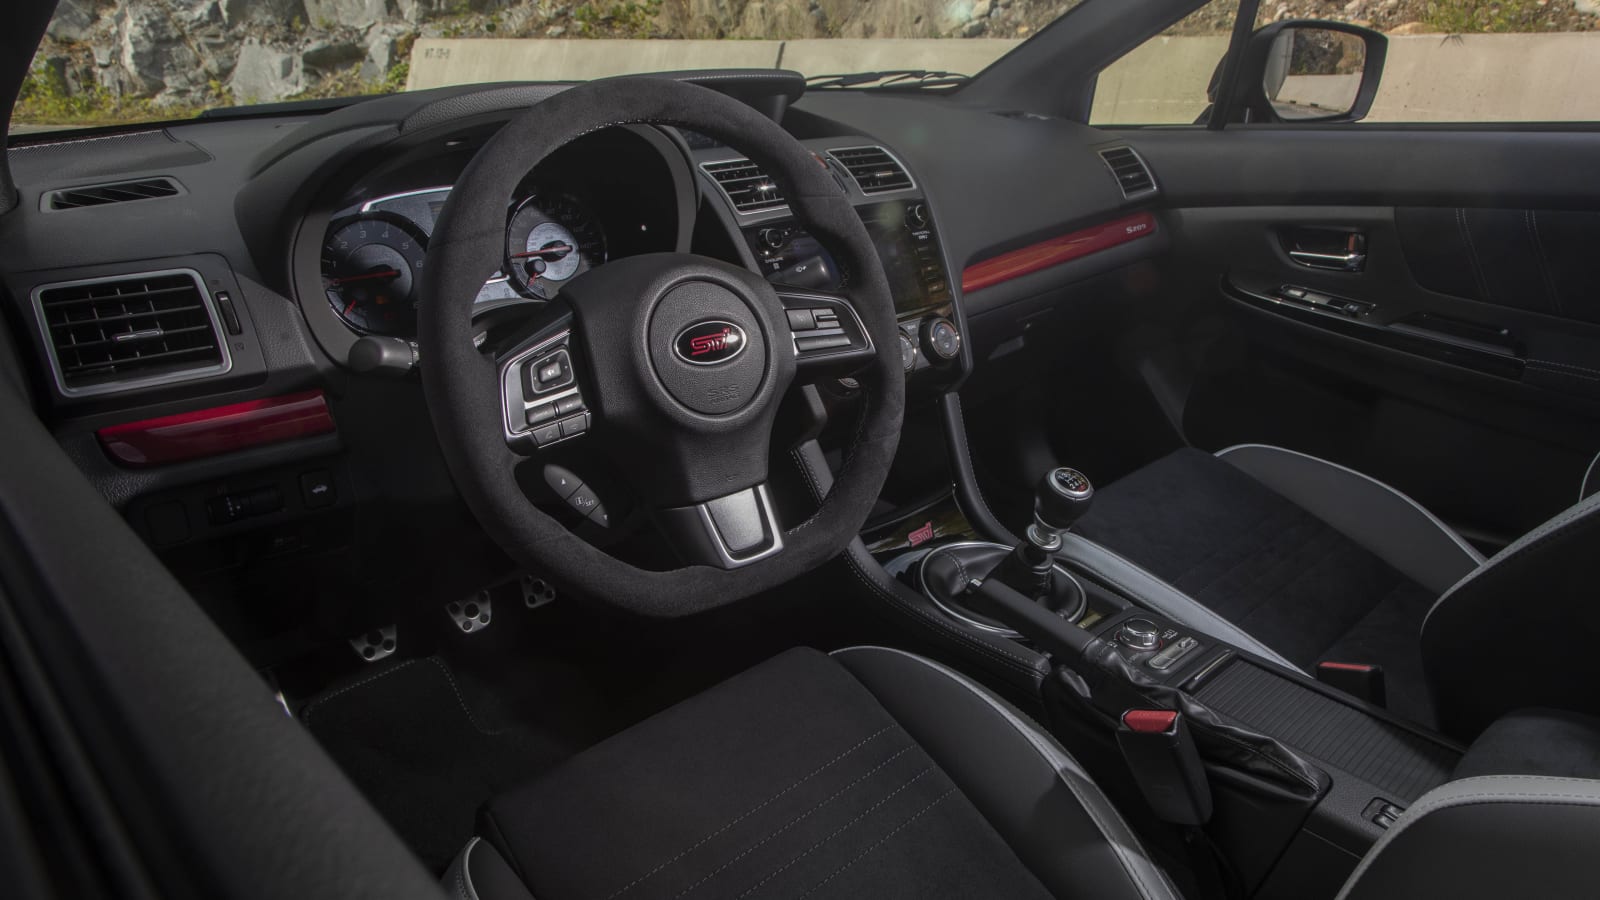 2019 Subaru Sti S209 Review What Is It How It Drives How